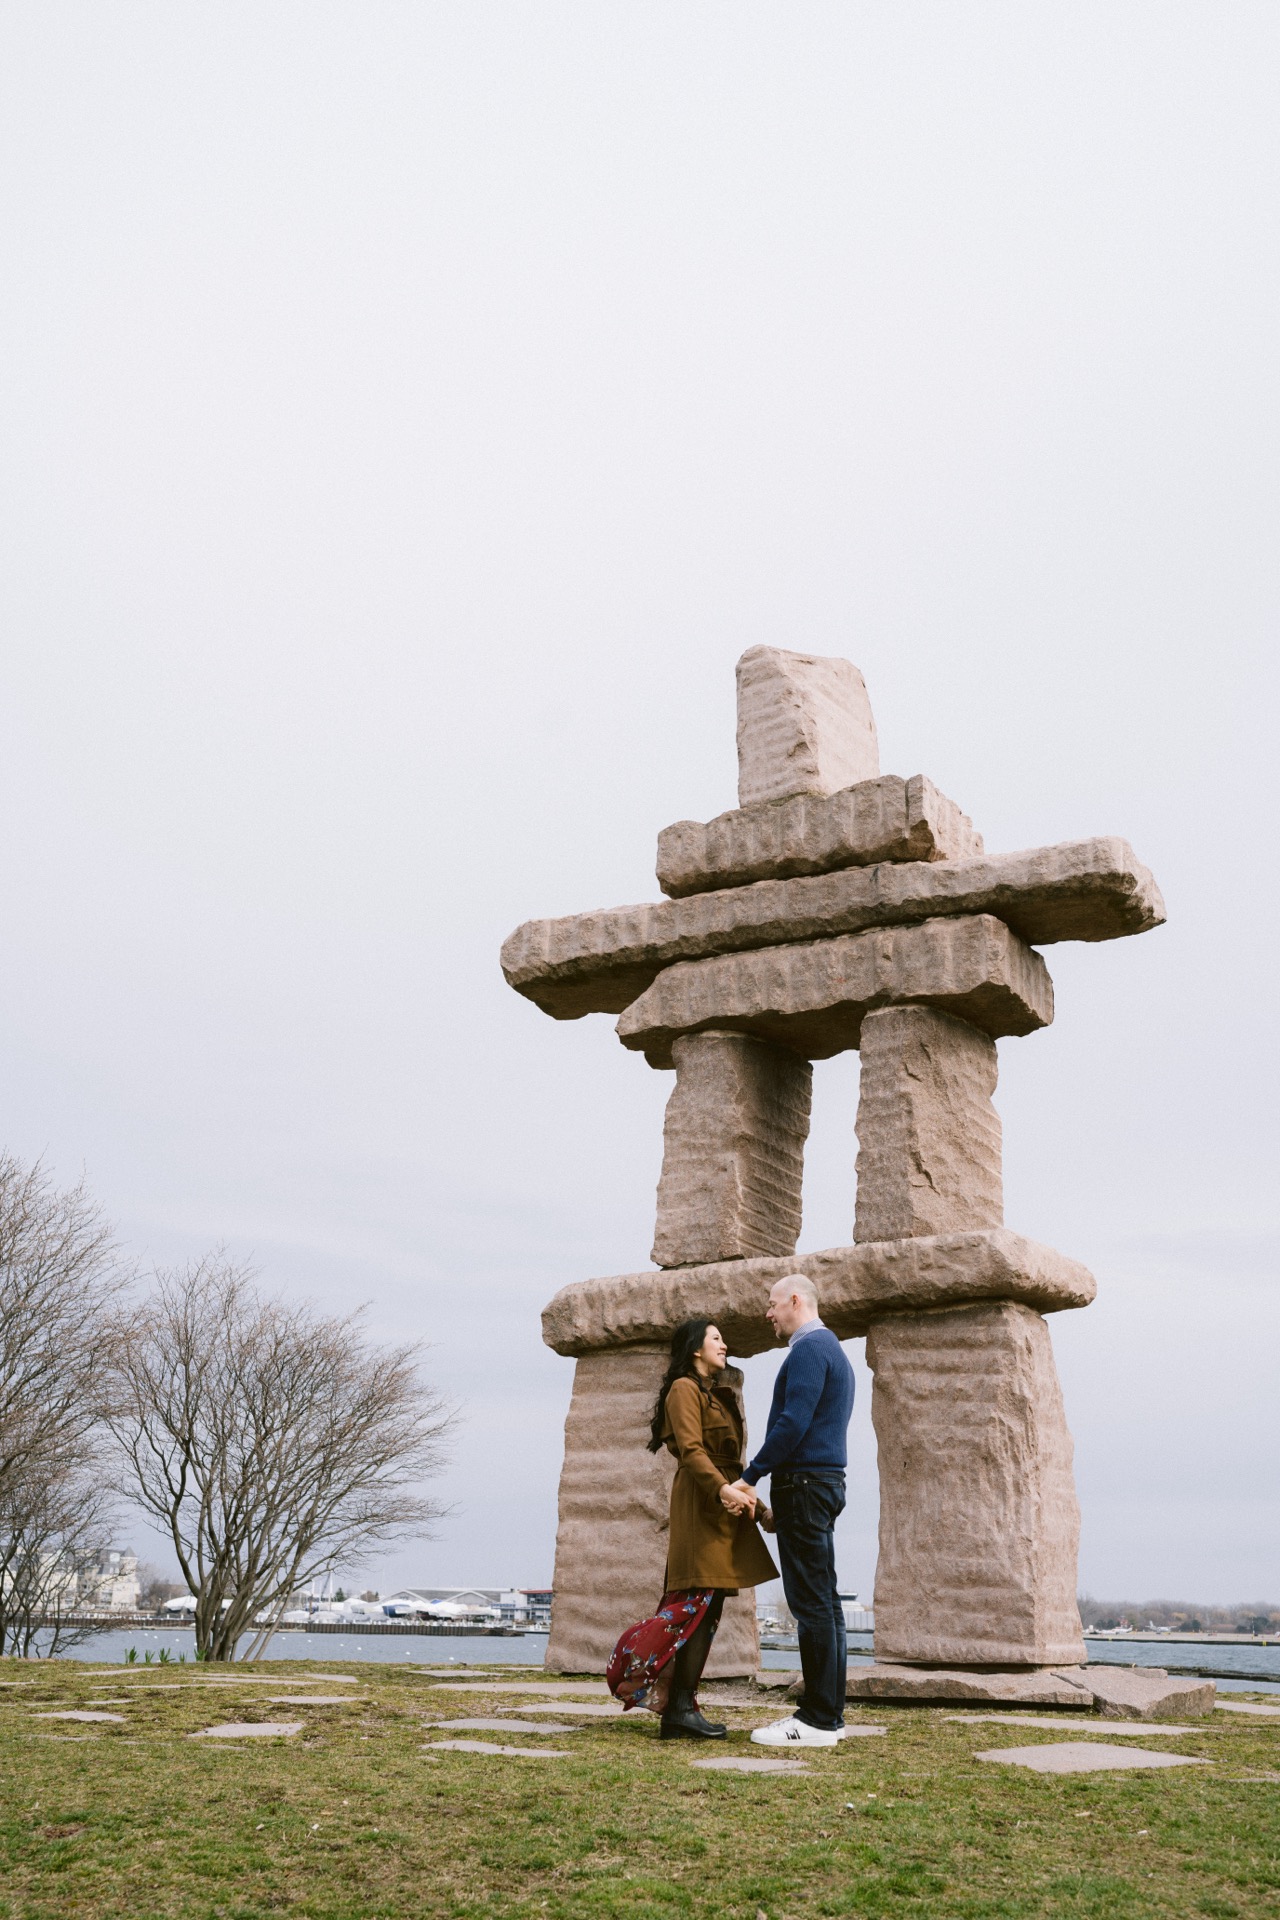 A couple stands holding hands during their engagement session in front of a large inukshuk structure at Trillium Park